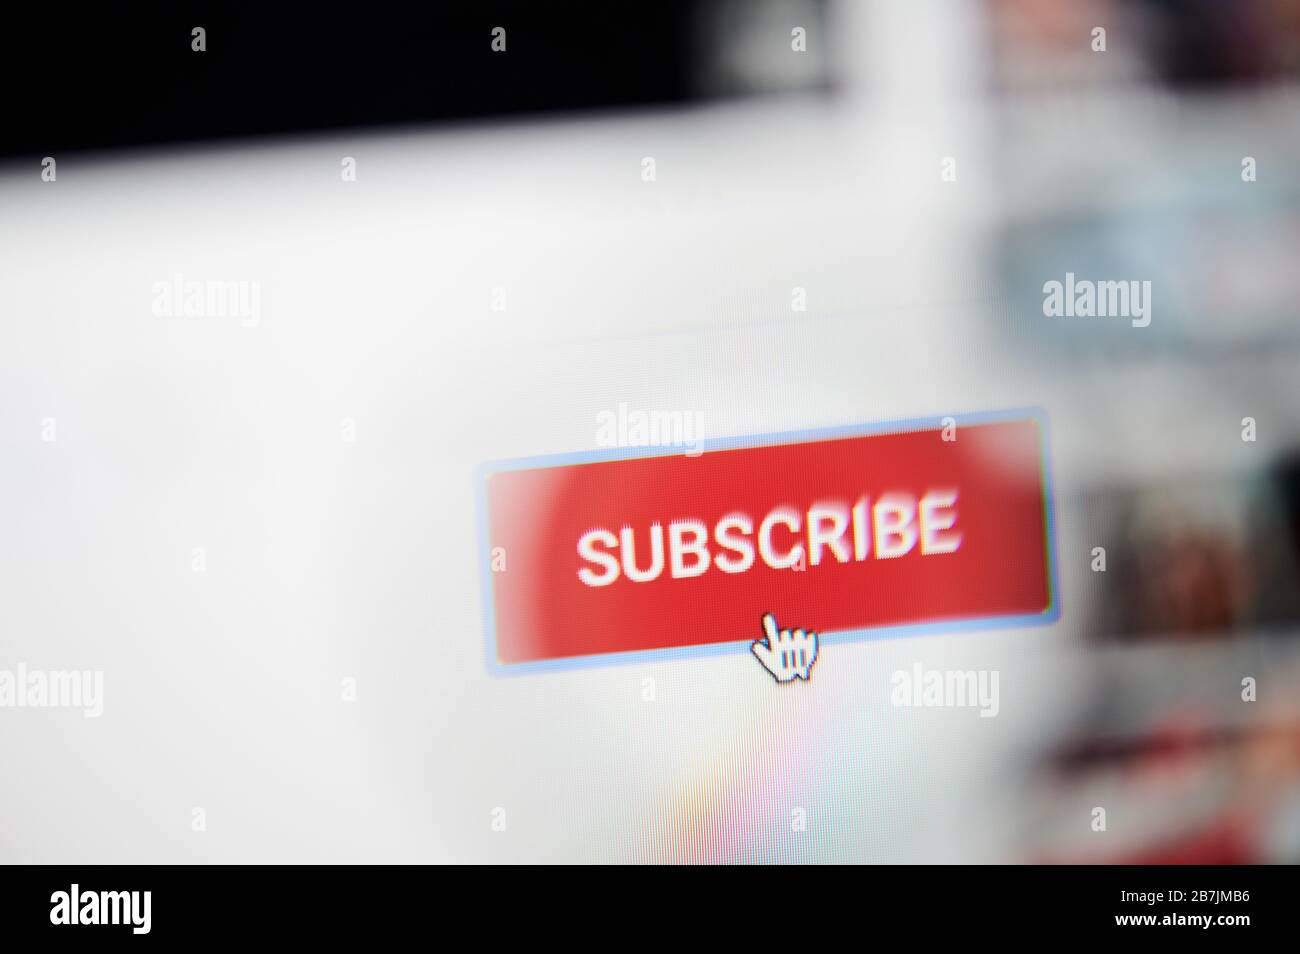 New-York , USA - March 13, 2020: Press subscribe button on youtube channel close up view through magnifier Stock Photo